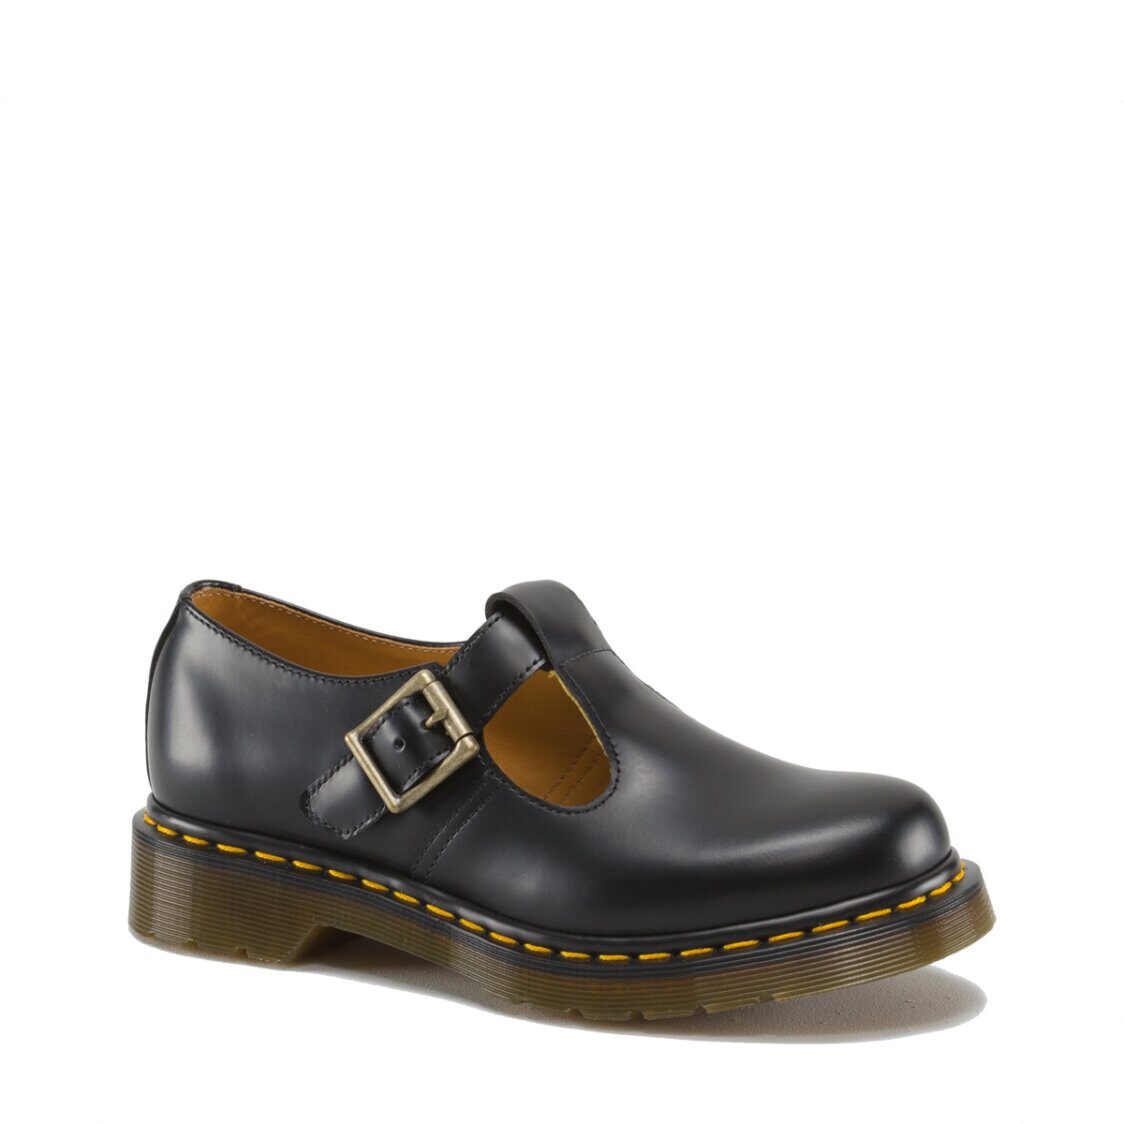 Dr Marten Polley Smooth Leather Mary Janes Metro Department Store